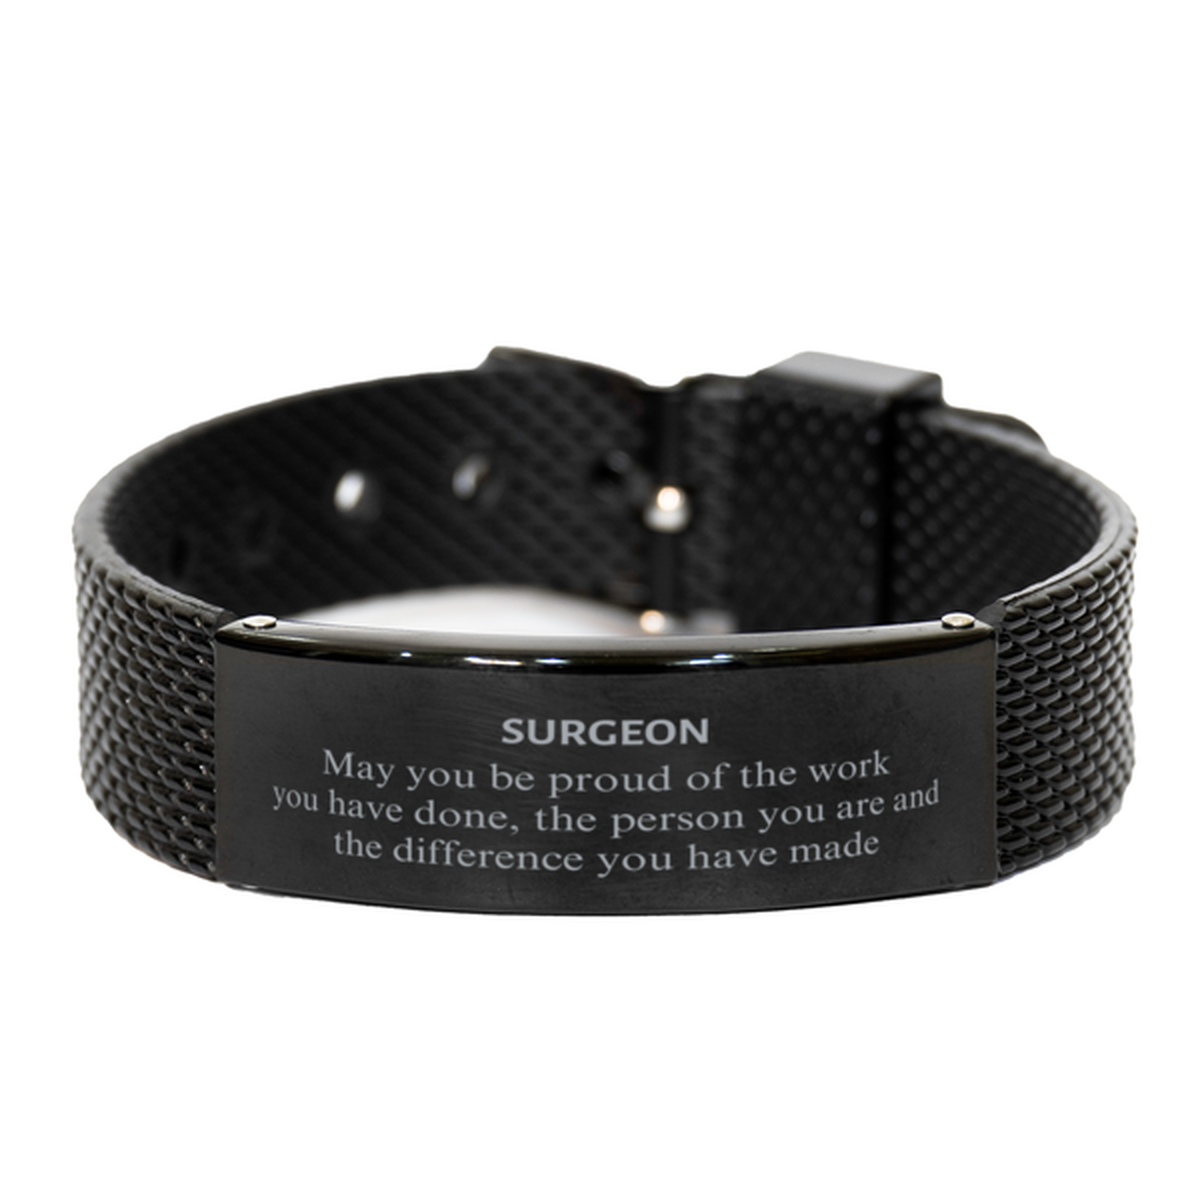 Surgeon May you be proud of the work you have done, Retirement Surgeon Black Shark Mesh Bracelet for Colleague Appreciation Gifts Amazing for Surgeon